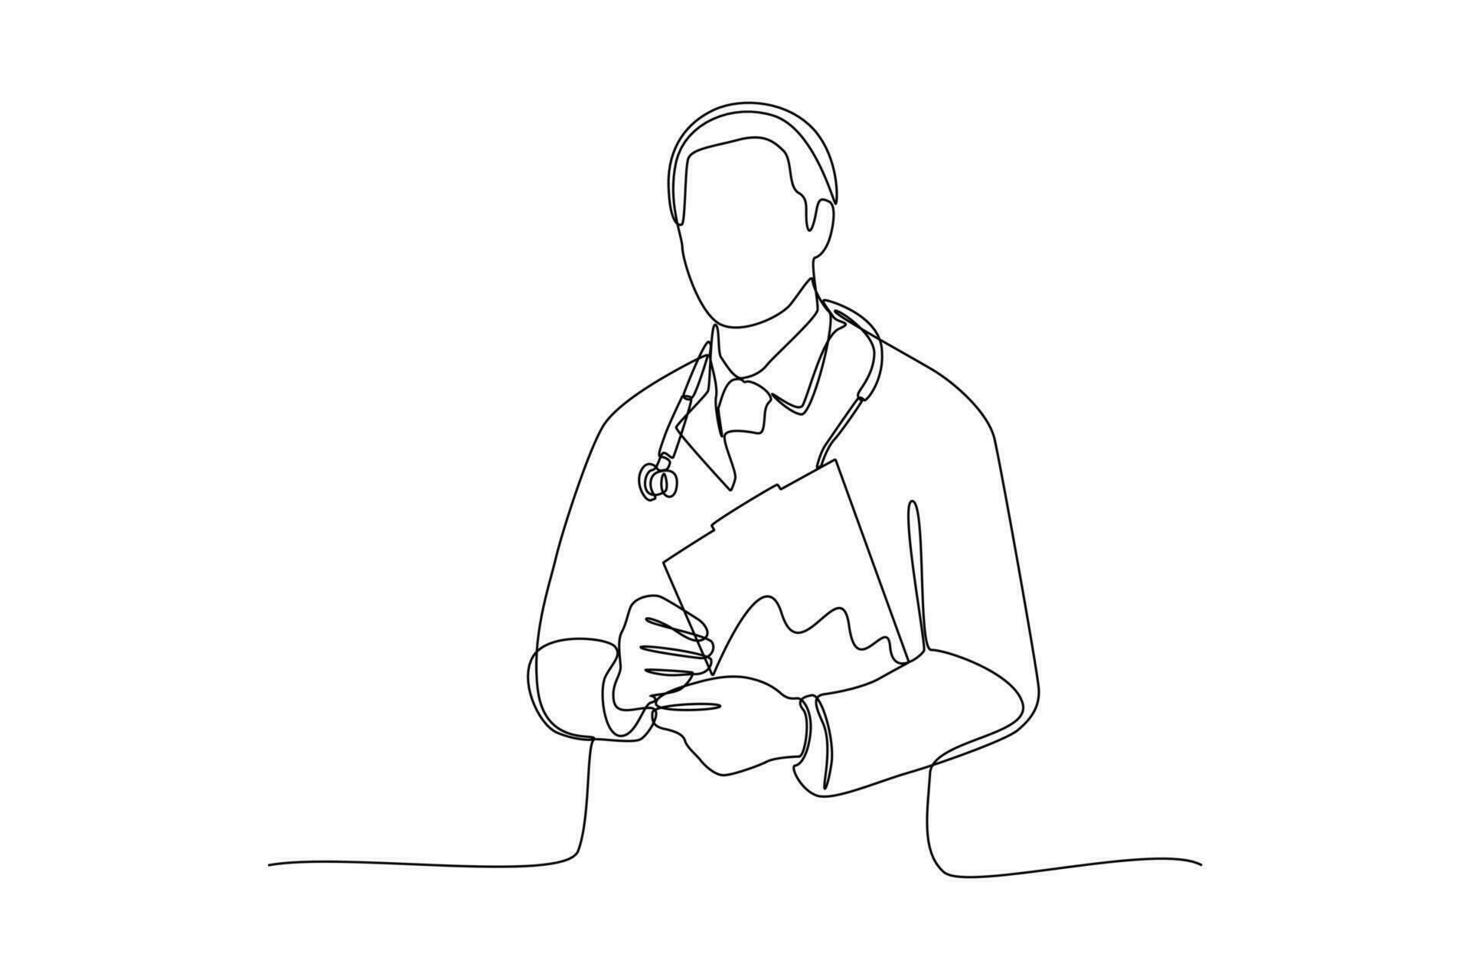 Continuous one line drawing healthcare activity concept. Single line draw design vector graphic illustration.